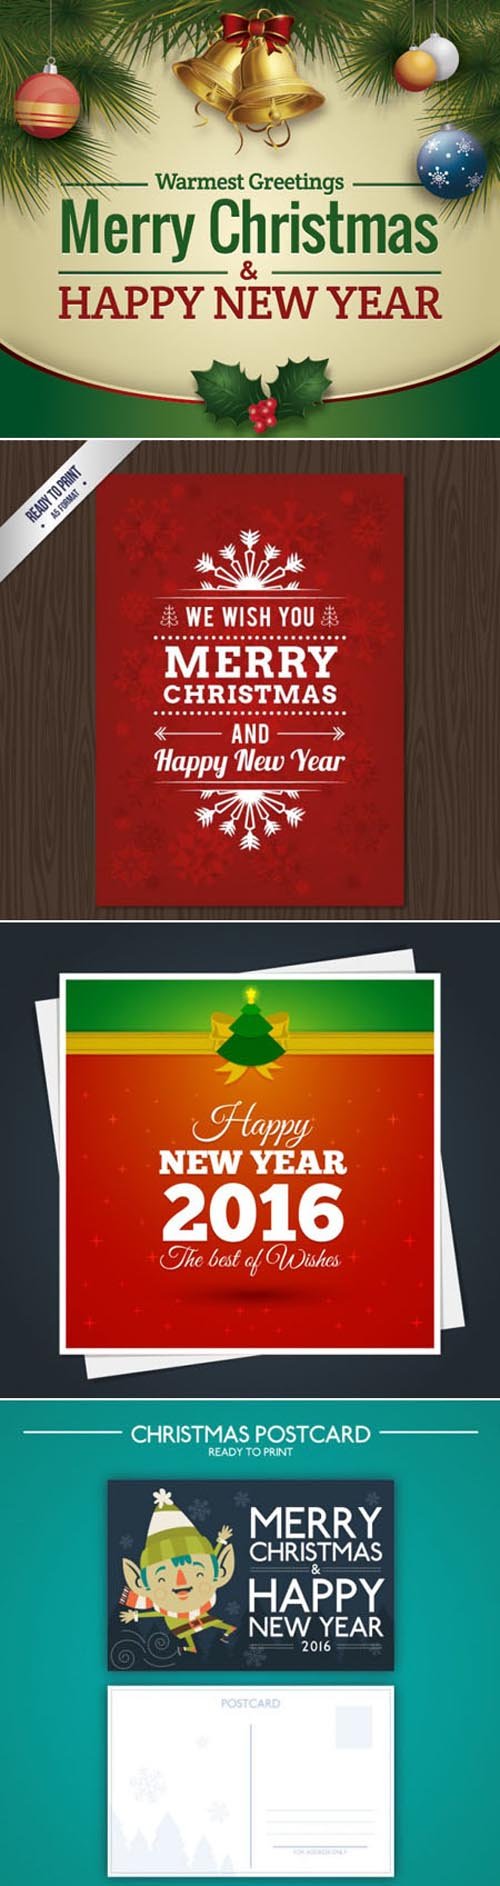 New Year 2016 Cards in Vector [Vol.4]